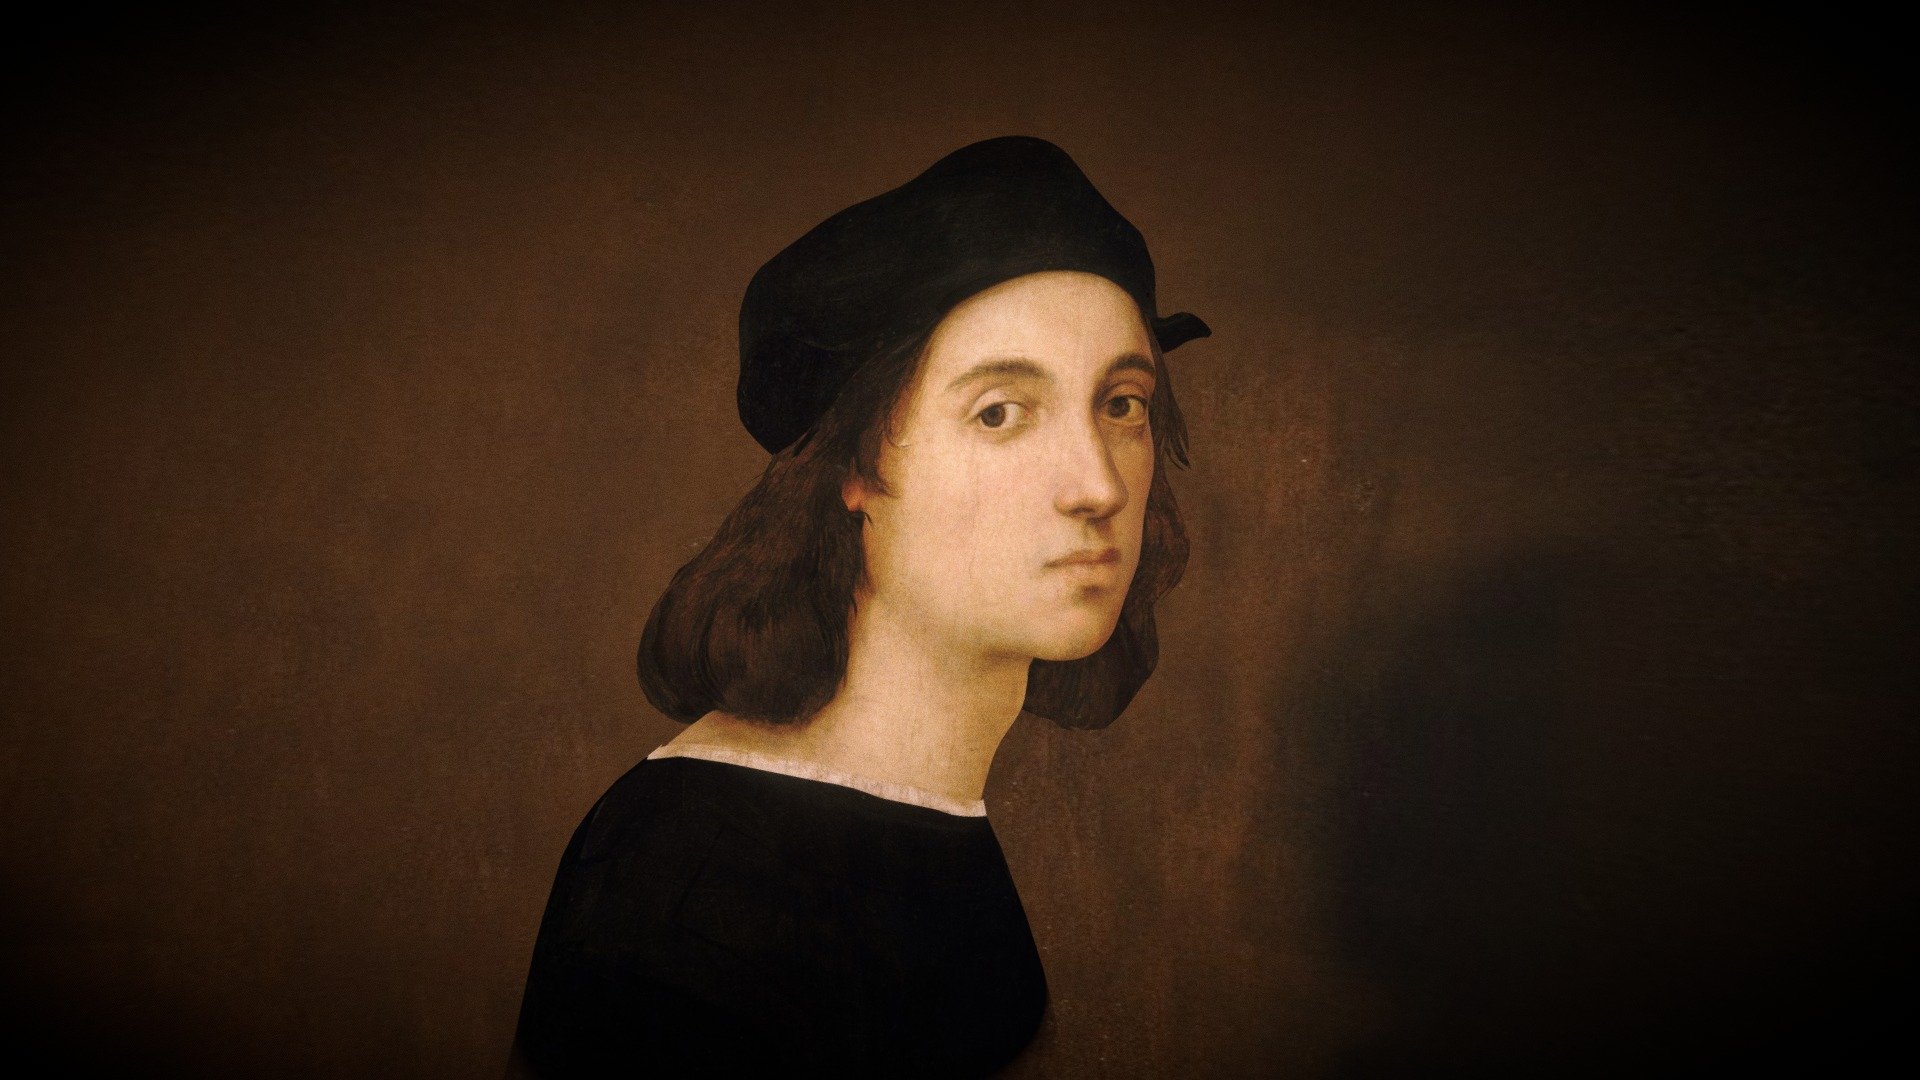 Here it goes our 3D rendition of the Raphael's self-portrait! You can watch the original in Uffizi Galleries&hellip; hope you like it!

If you want to learn more about it you can visit our website www.artediffusa.com

https://www.uffizi.it/en/artworks/raffaello-autoritratto
Raffaello Sanzio, Autoritratto
Galleria degli Uffizi, Firenze, 1506

Around 20000 faces,
made and textured with Blender - Raphael - 3D model by Hermathena3D 3d model